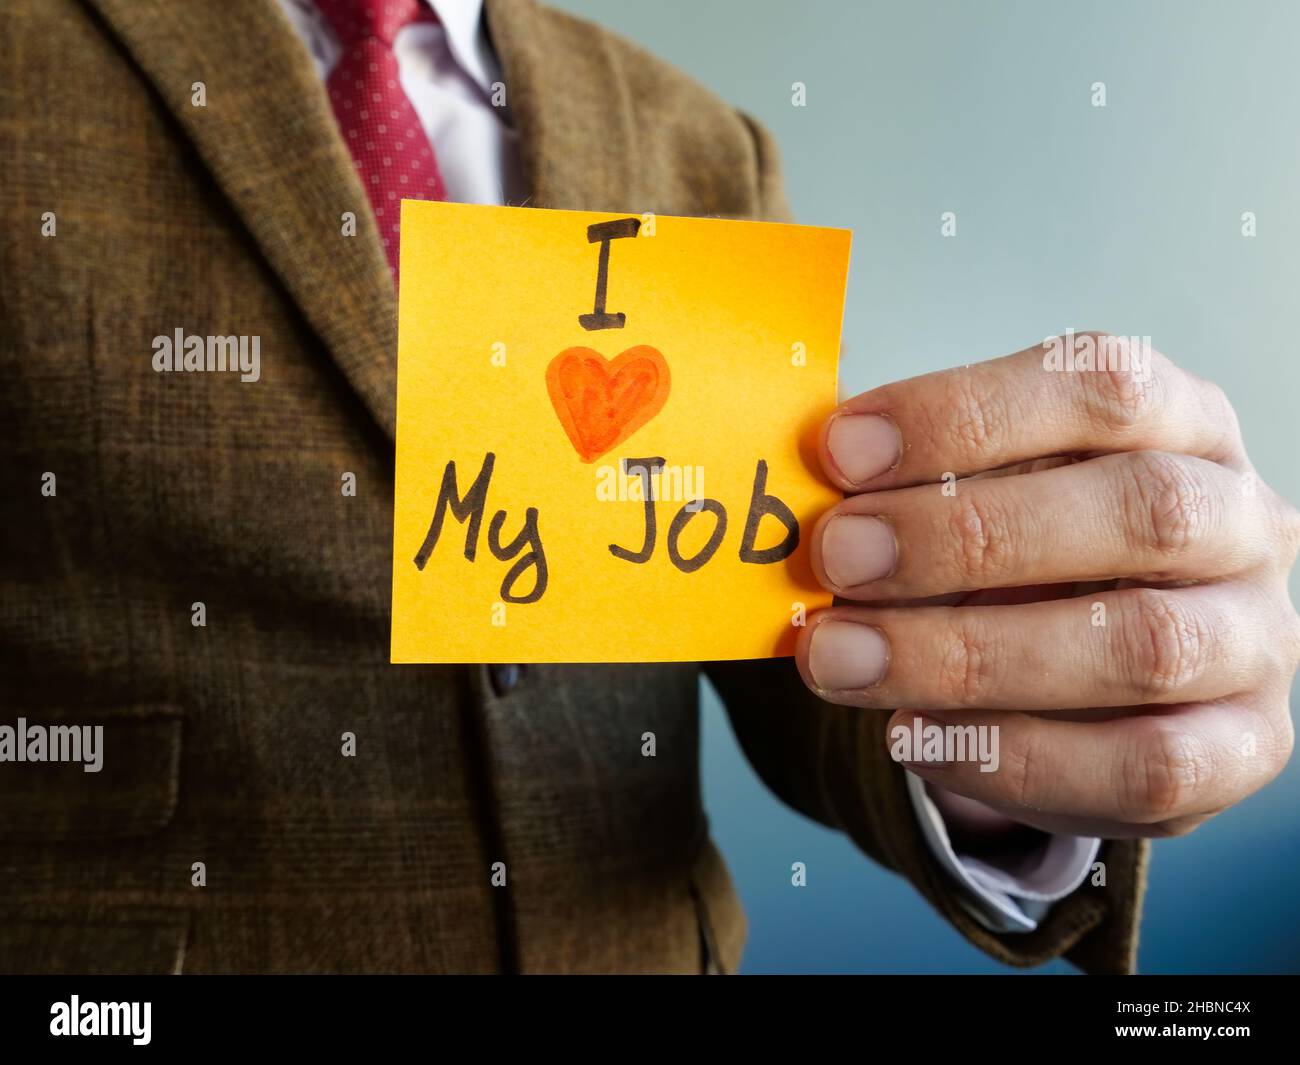 Man shows sign I love my job. Employee satisfaction concept. Stock Photo